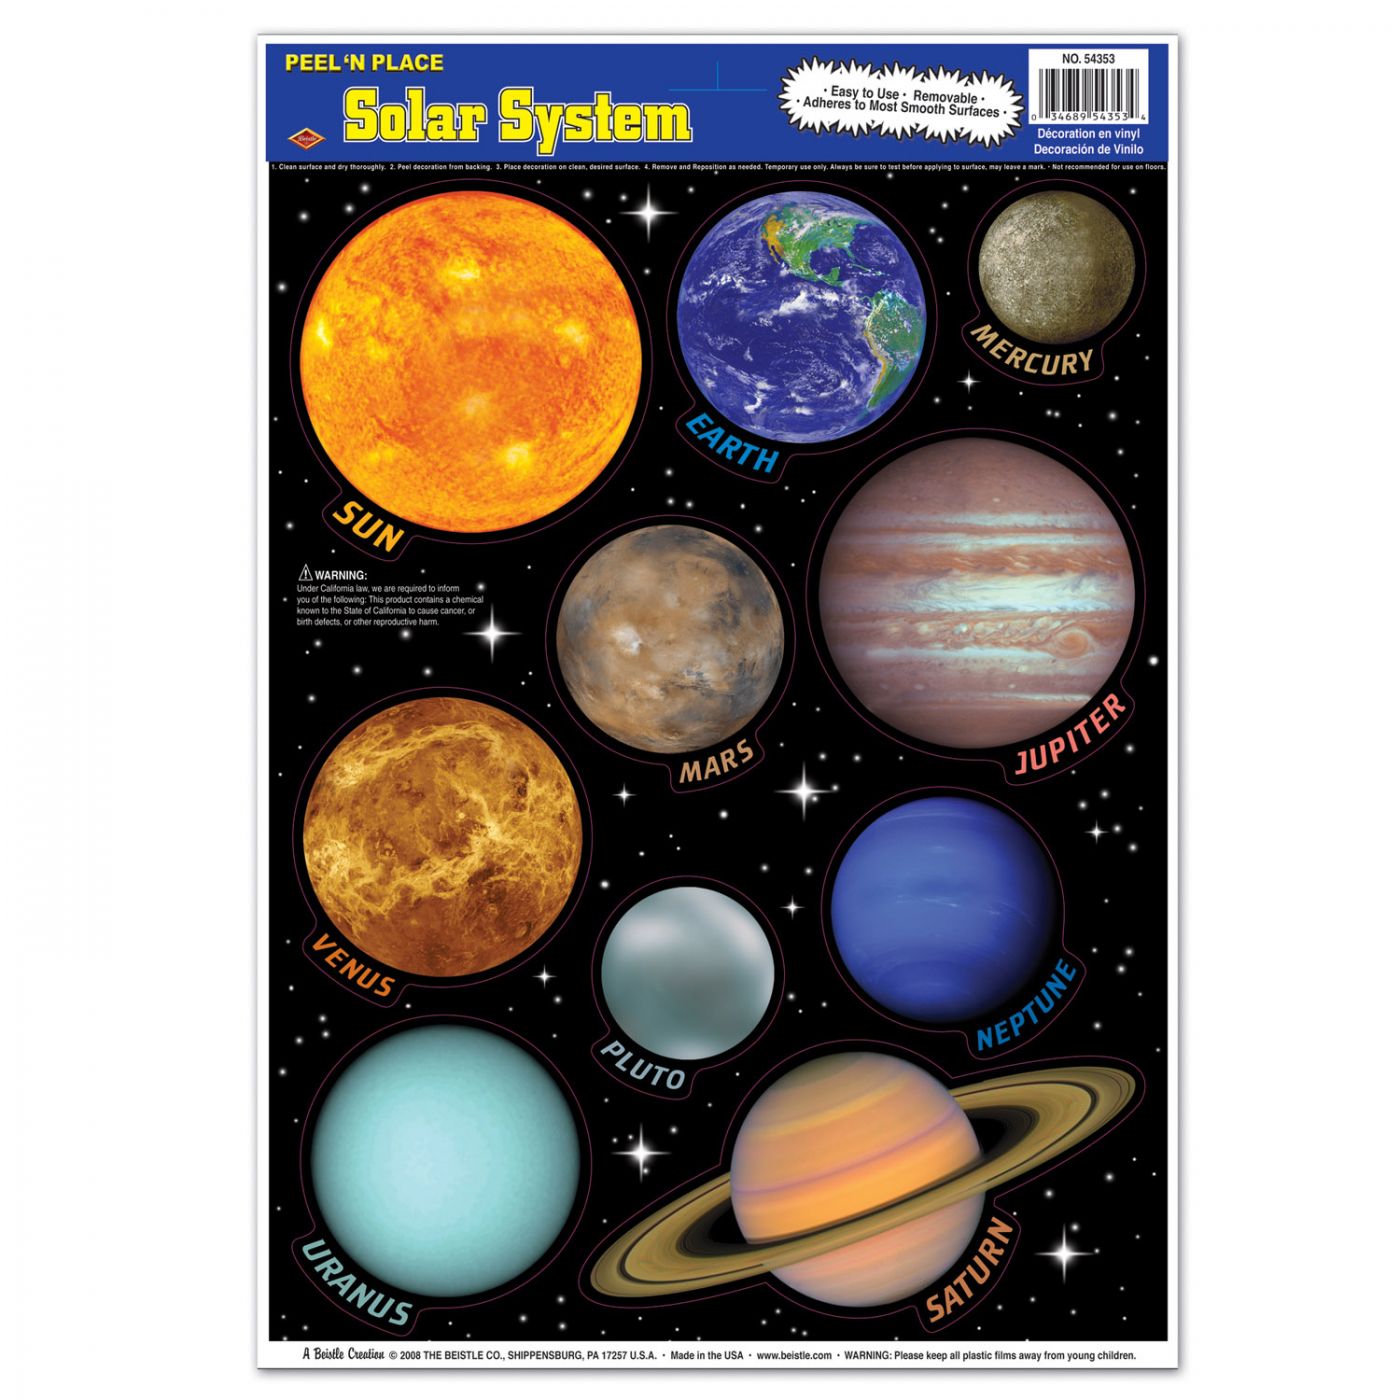 Solar System Peel 'N Place image